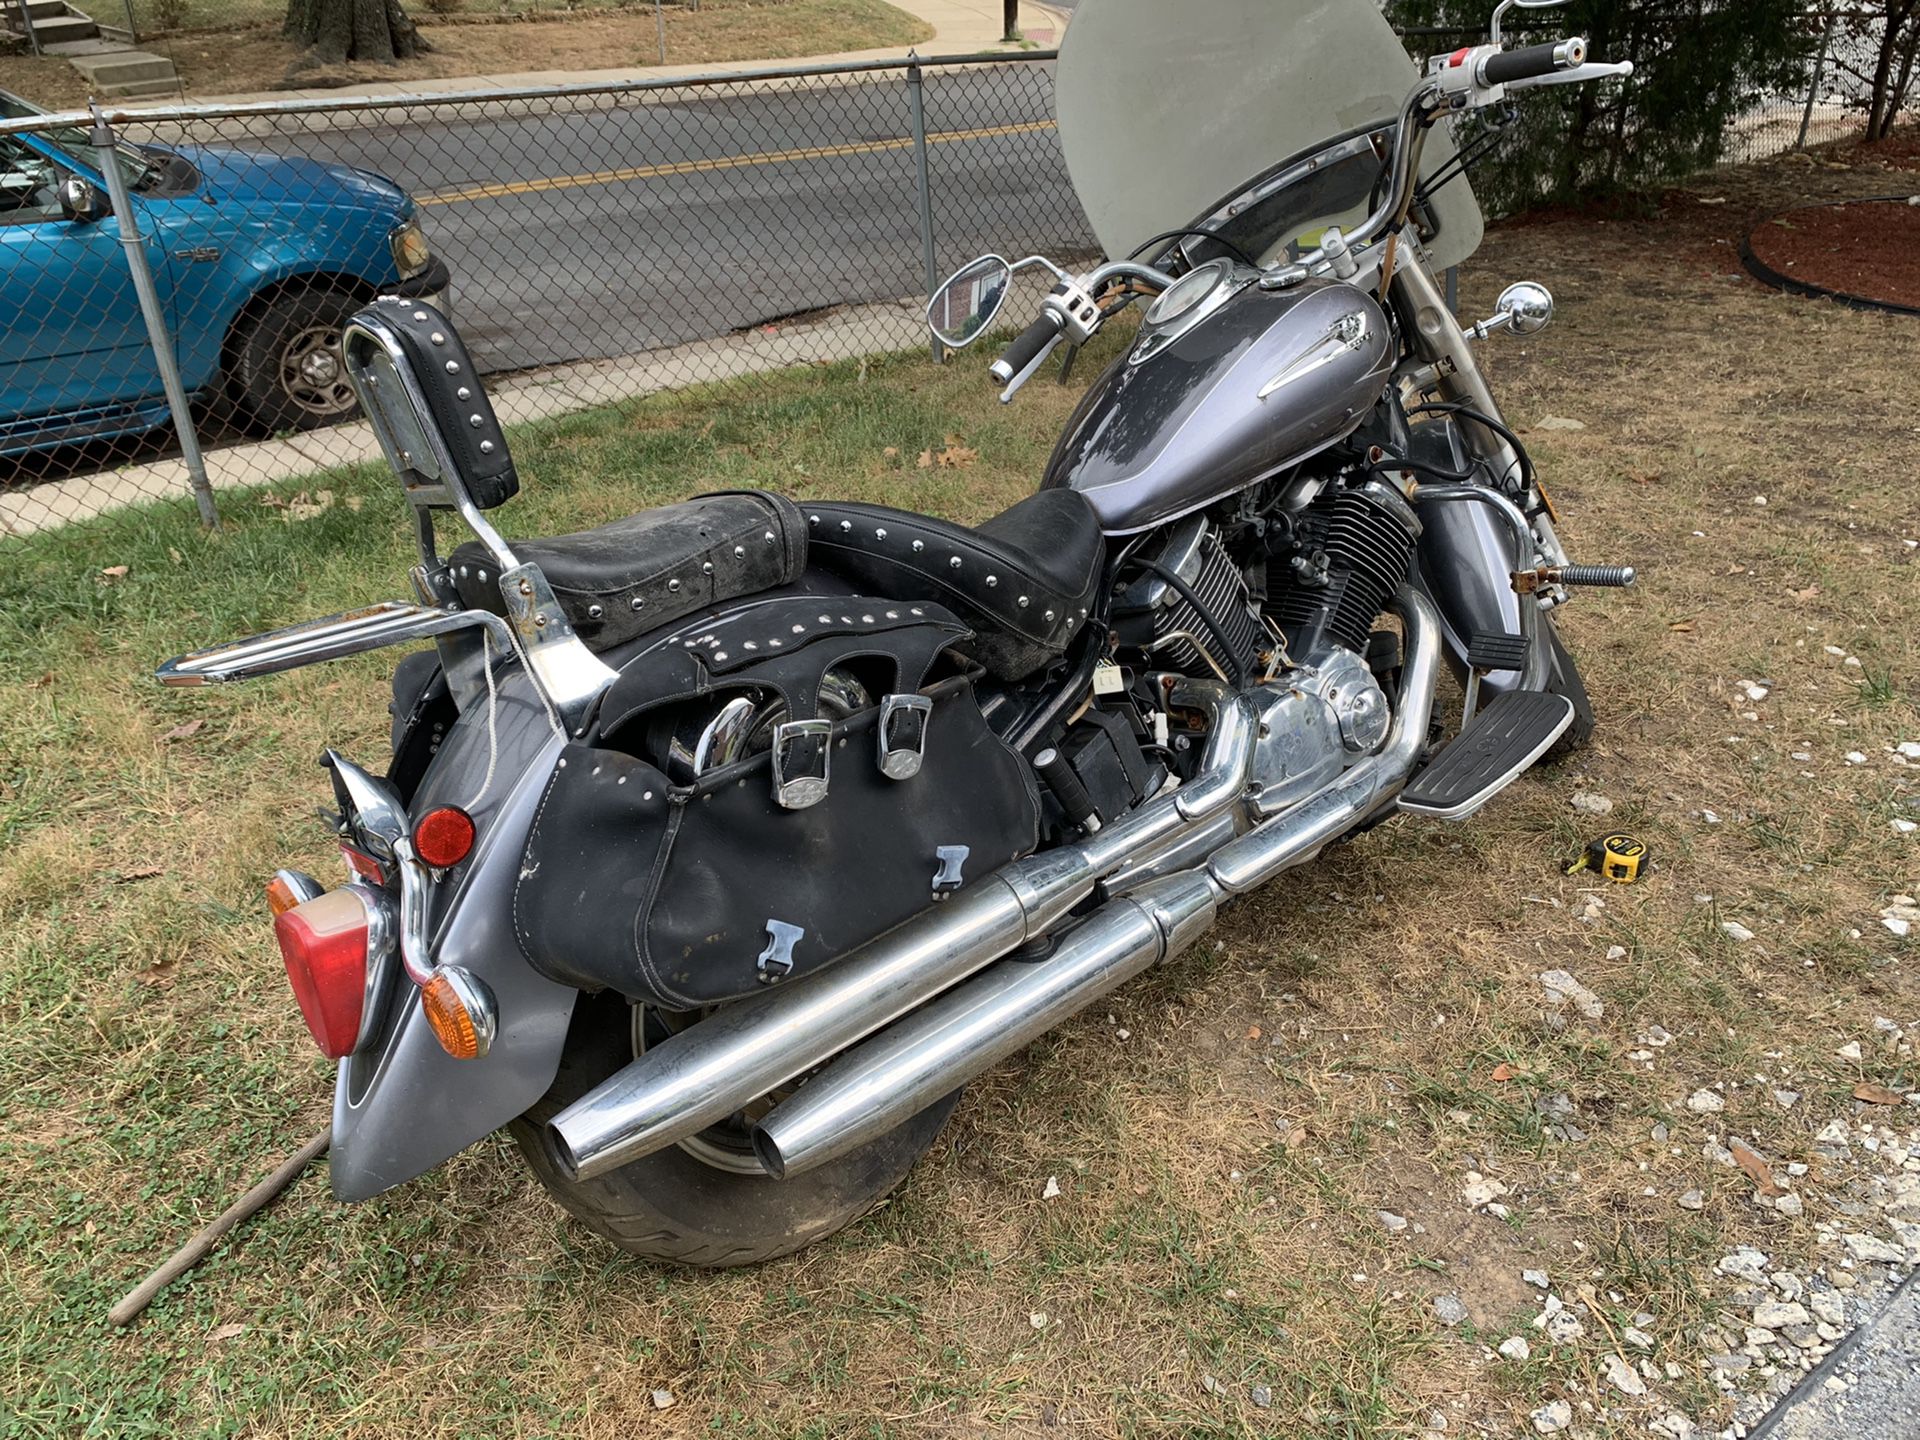 Yamaha v star project or for parts